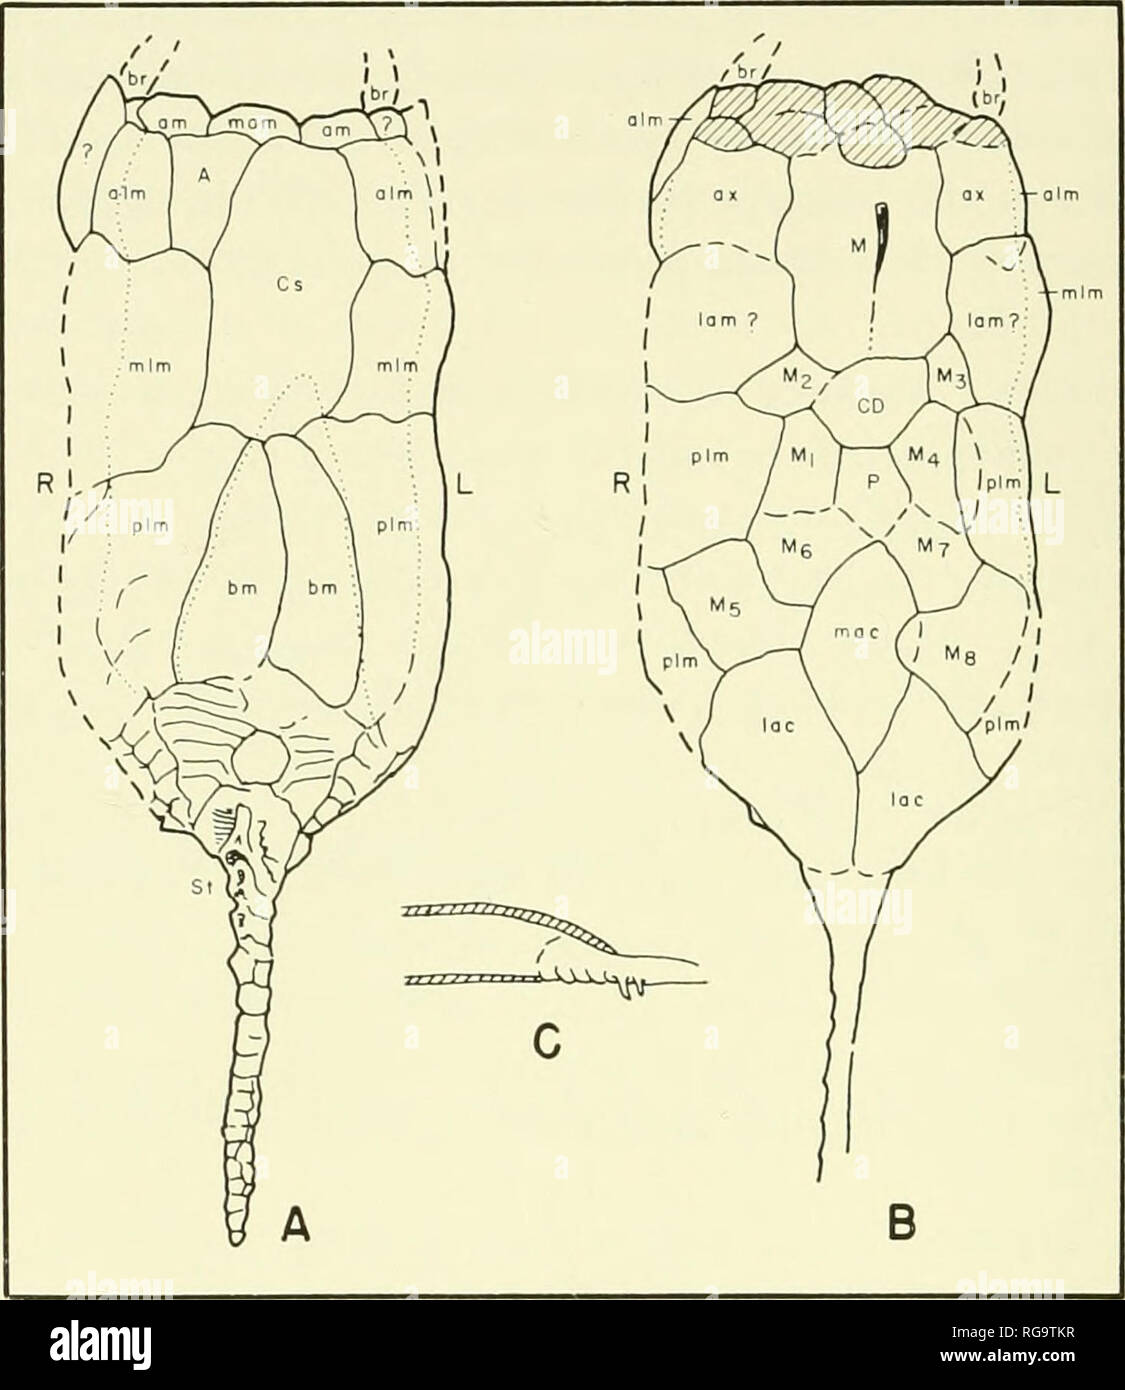 . Bulletins of American paleontology. 48 Bulletin 185. Text-fig. 11.—Morphologic lineaments of Victoriacystis ivilkinsi Gill and Caster, new genus, new species, based on photographs of the holotype. A. Plastron surface. B. Carapace surface. C. Diagrammatic representation of the proximal region, lateral view, showing the hooded overhang of the carapace above the proximal stele, and the corresponding excavation of the plastron to accommodate the exceptionally large and broad proximal stele. Solid lines represent definite margins and sutures. Broken lines are lineaments, in part sutural, in part  Stock Photo